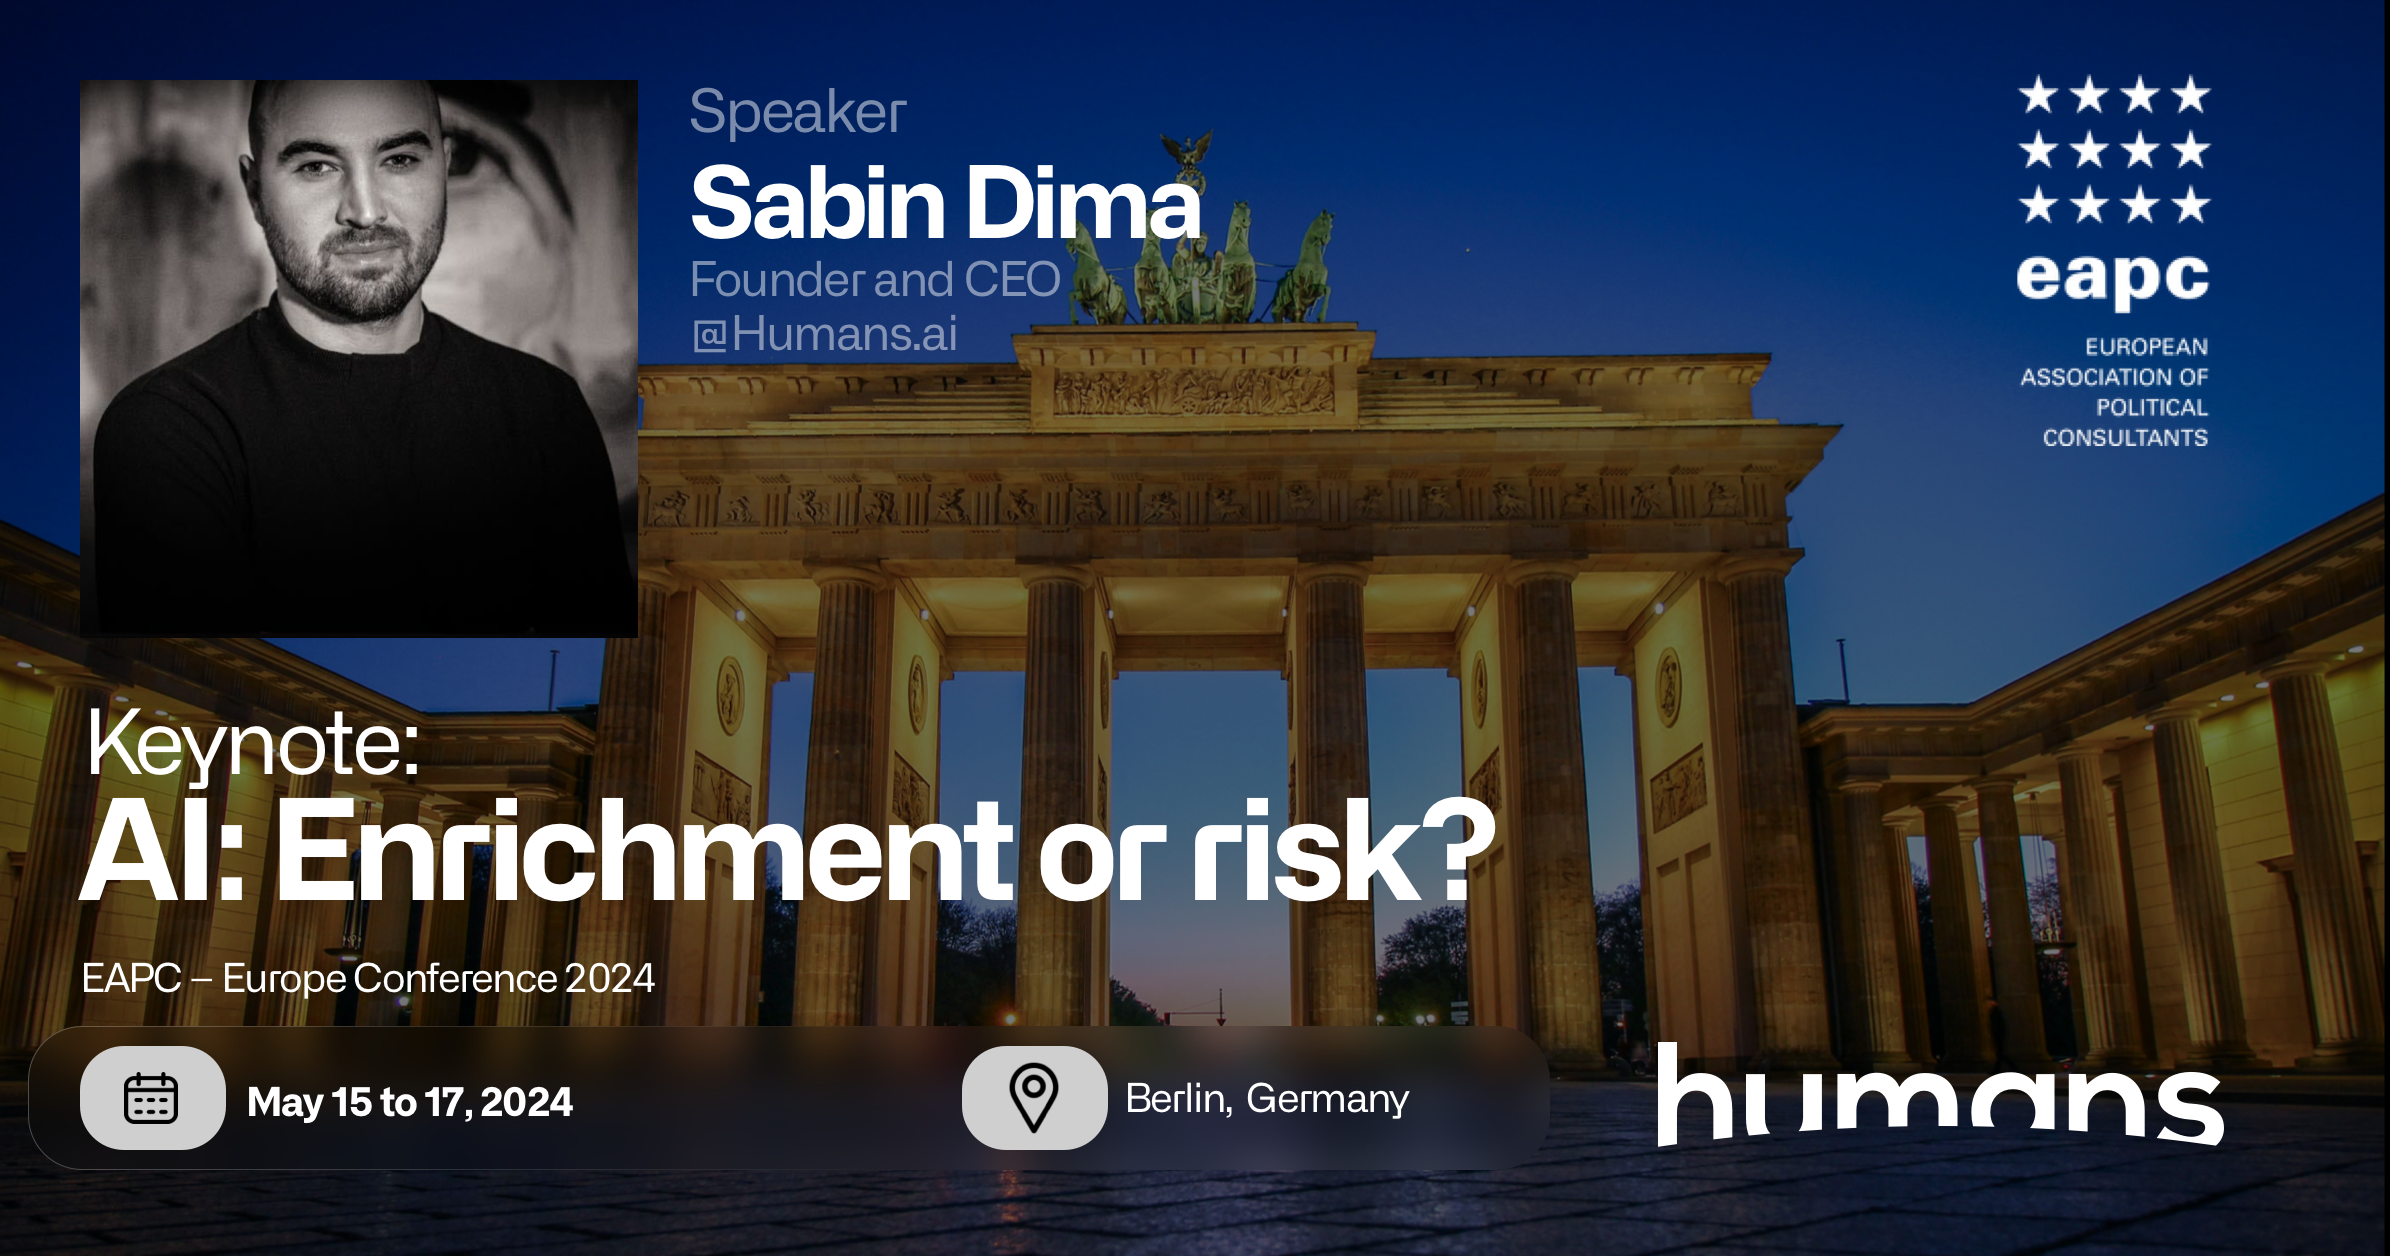 Humans.ai’s CEO presents at the EAPC 2024 Event in Berlin: “AI: Enrichment or Risk?”